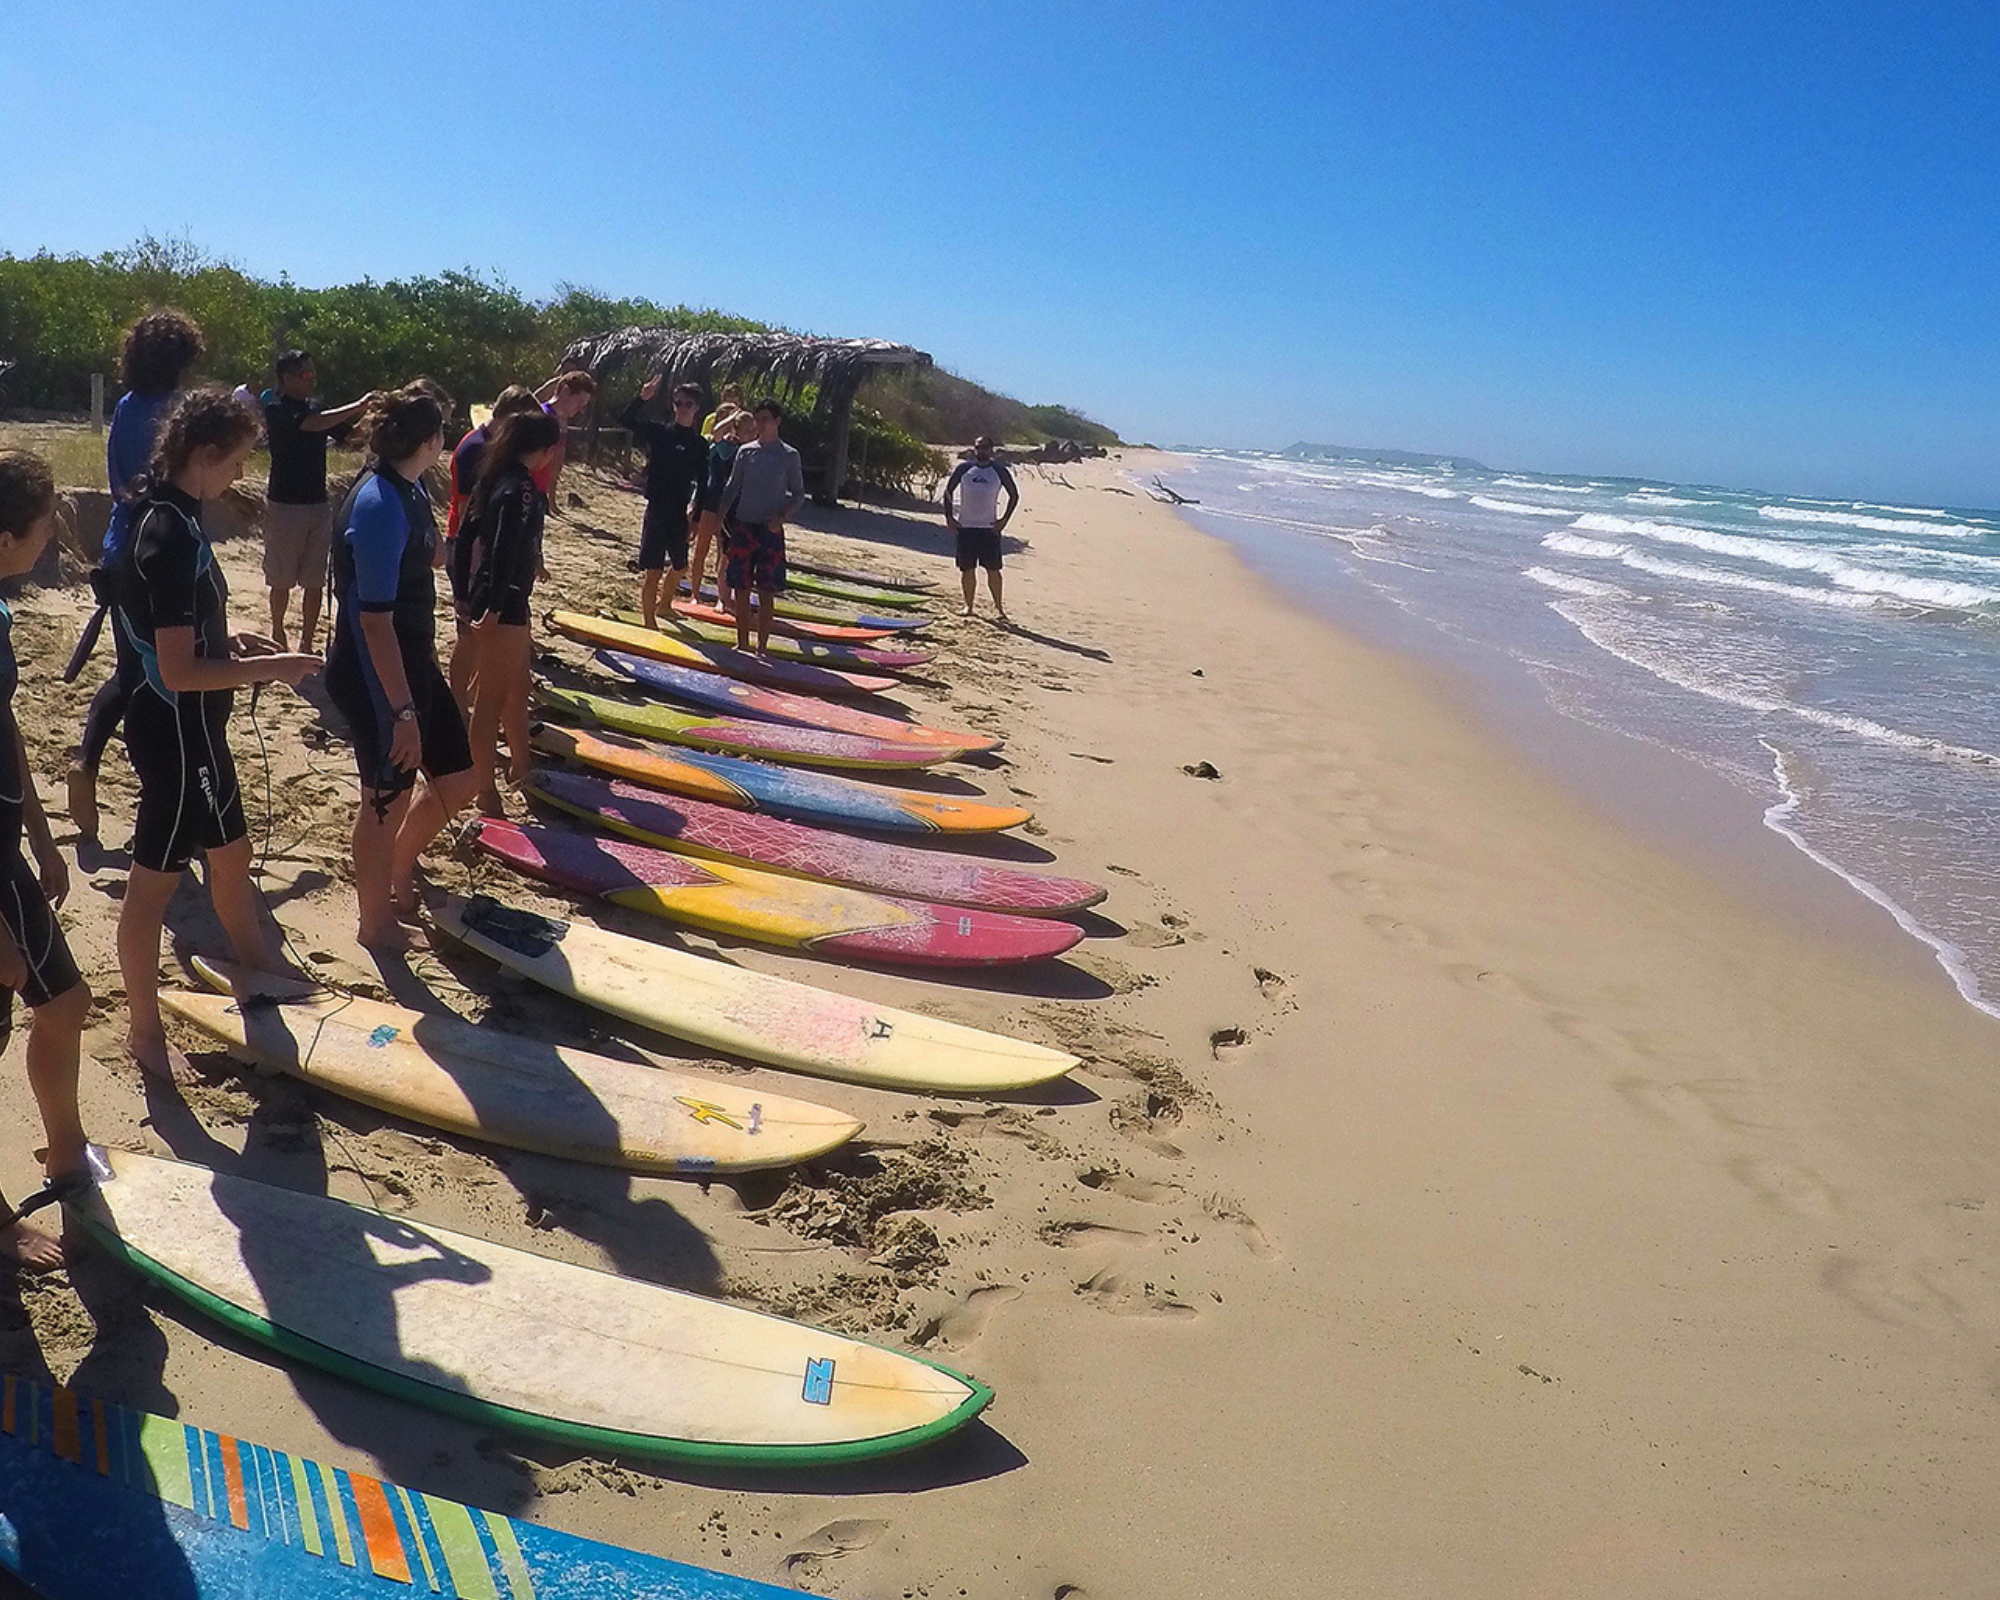 Women's Quest with surf boards on the Hawaii travel retreat thanking mother nature